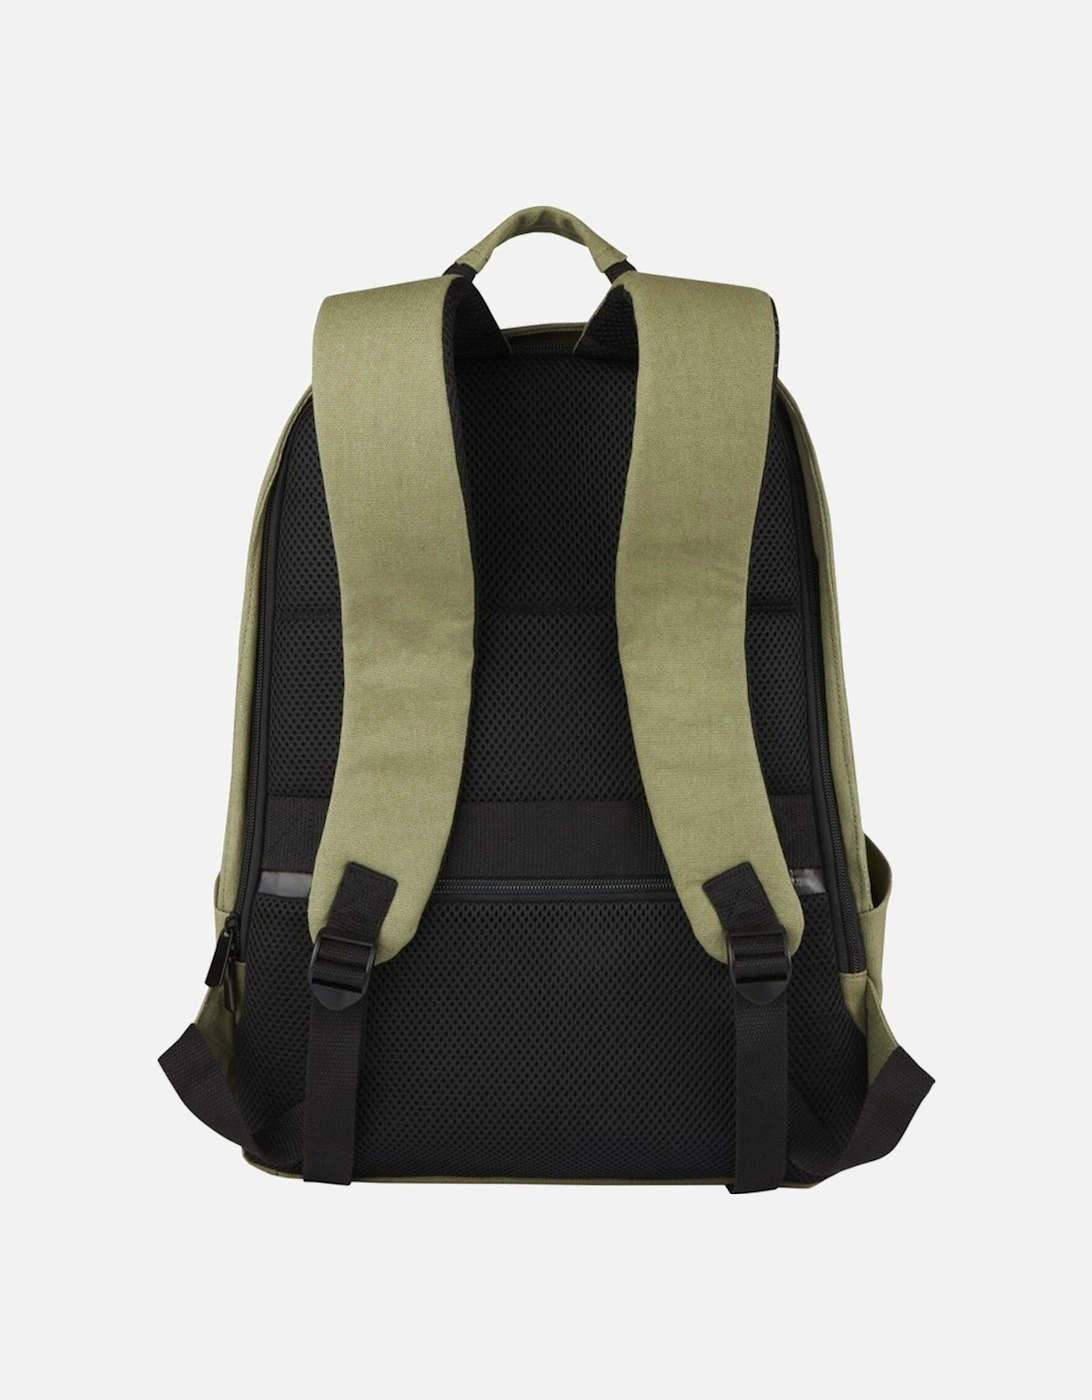 Joey Canvas Anti-Theft 18L Laptop Backpack